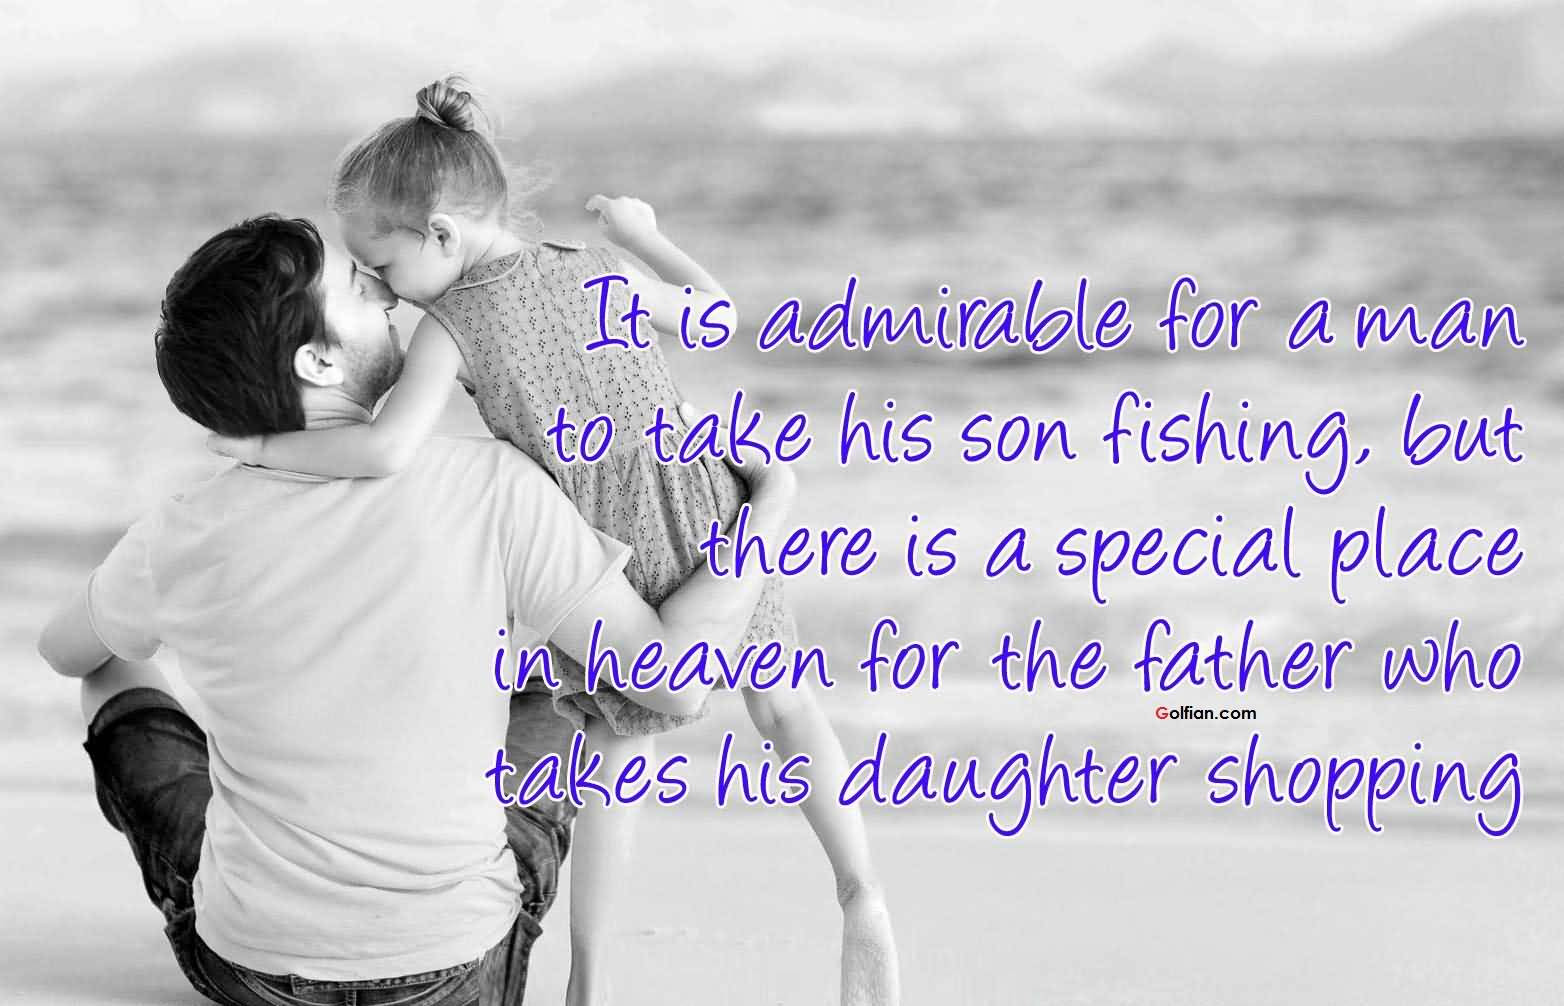 Father Daughter Inspirational Quotes
 60 Most Beautiful Father Daughter Quotes – Inspirational